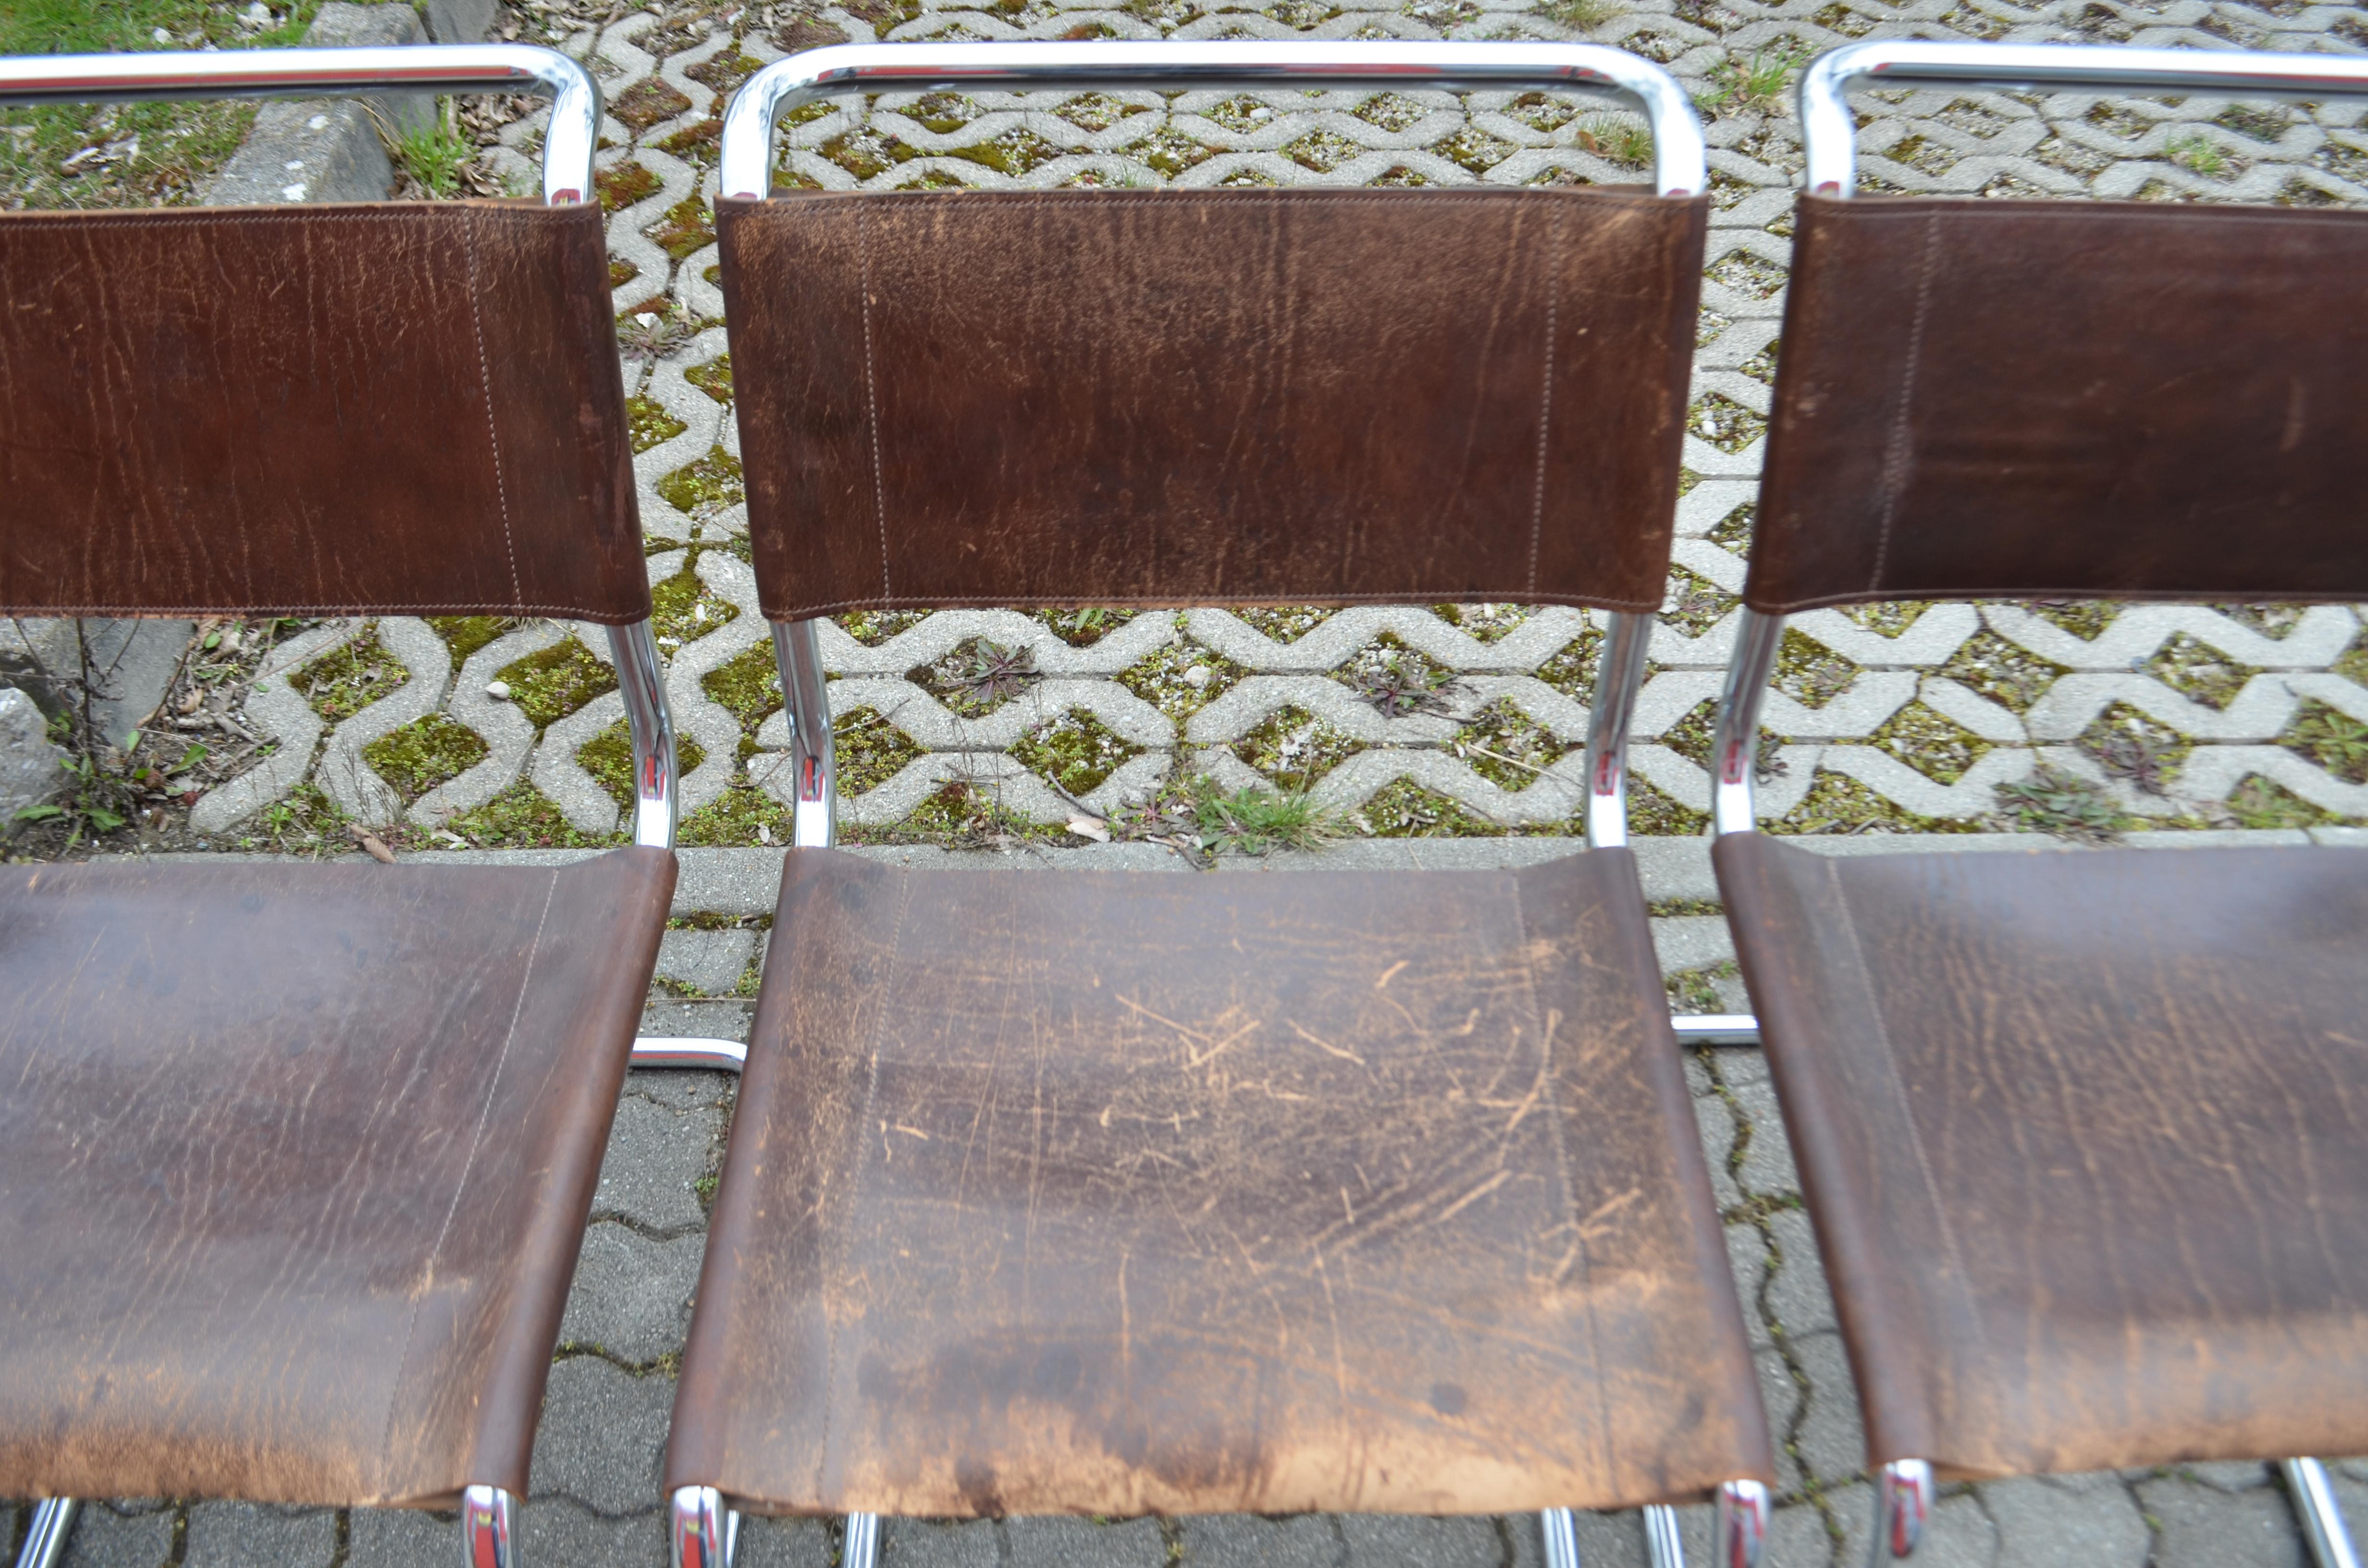 Vegetable Dyed Thonet S 33 Vintage Brown Leather Chairs Mart Stam Cantilever Set of 10 For Sale